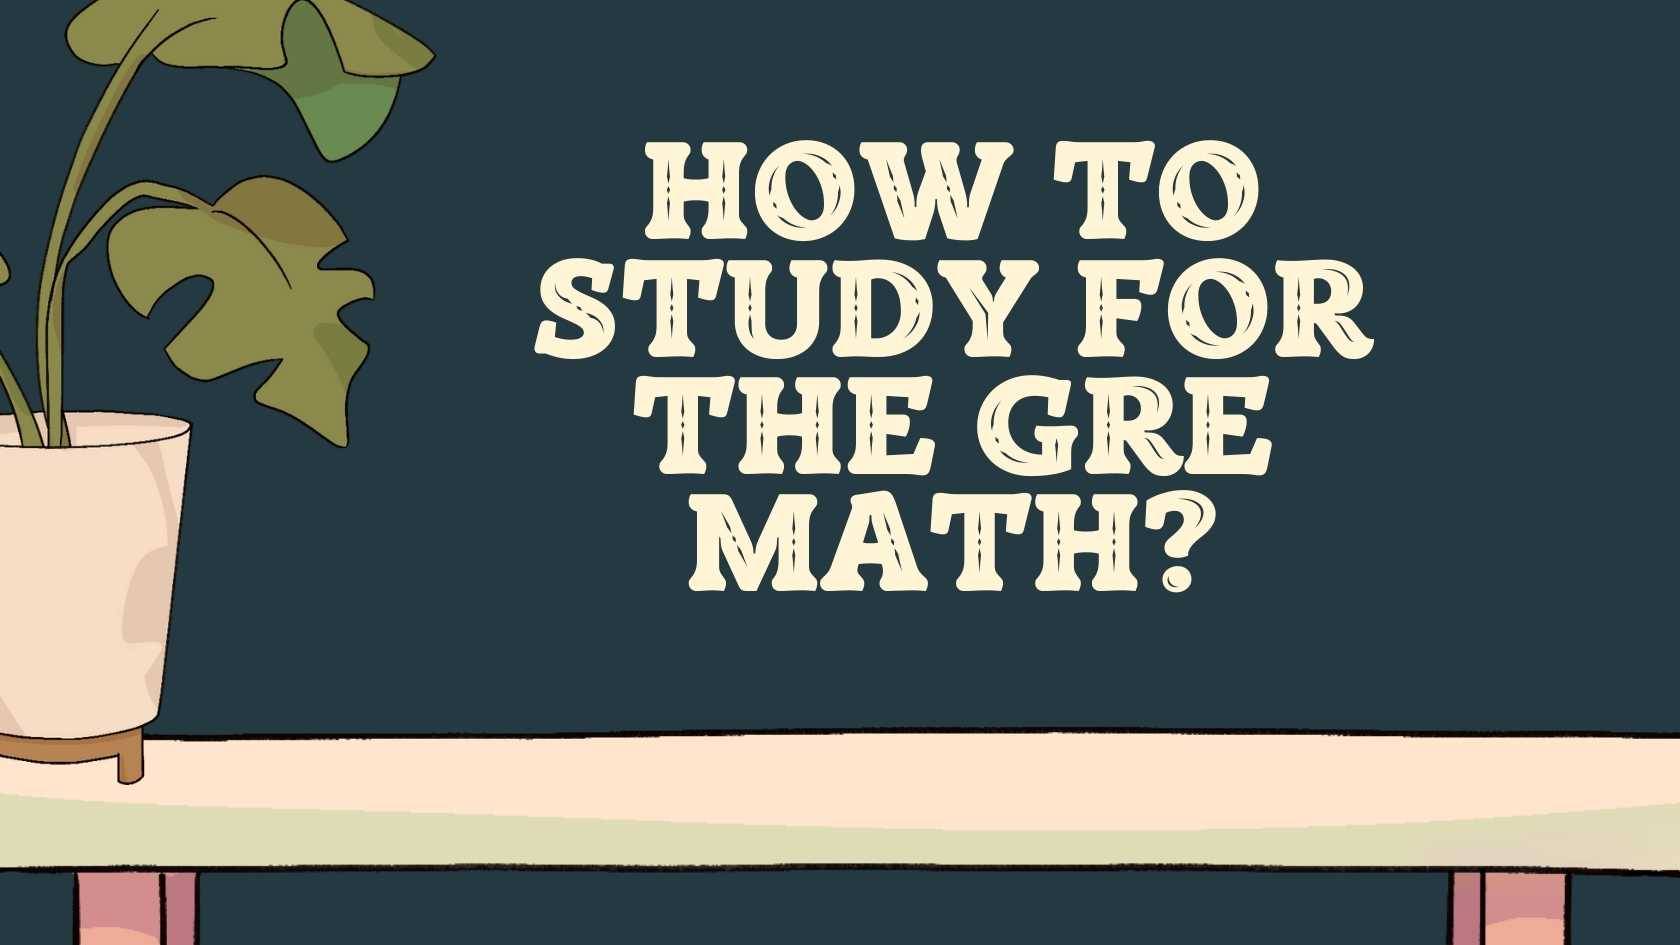 How to study for the GRE Math?